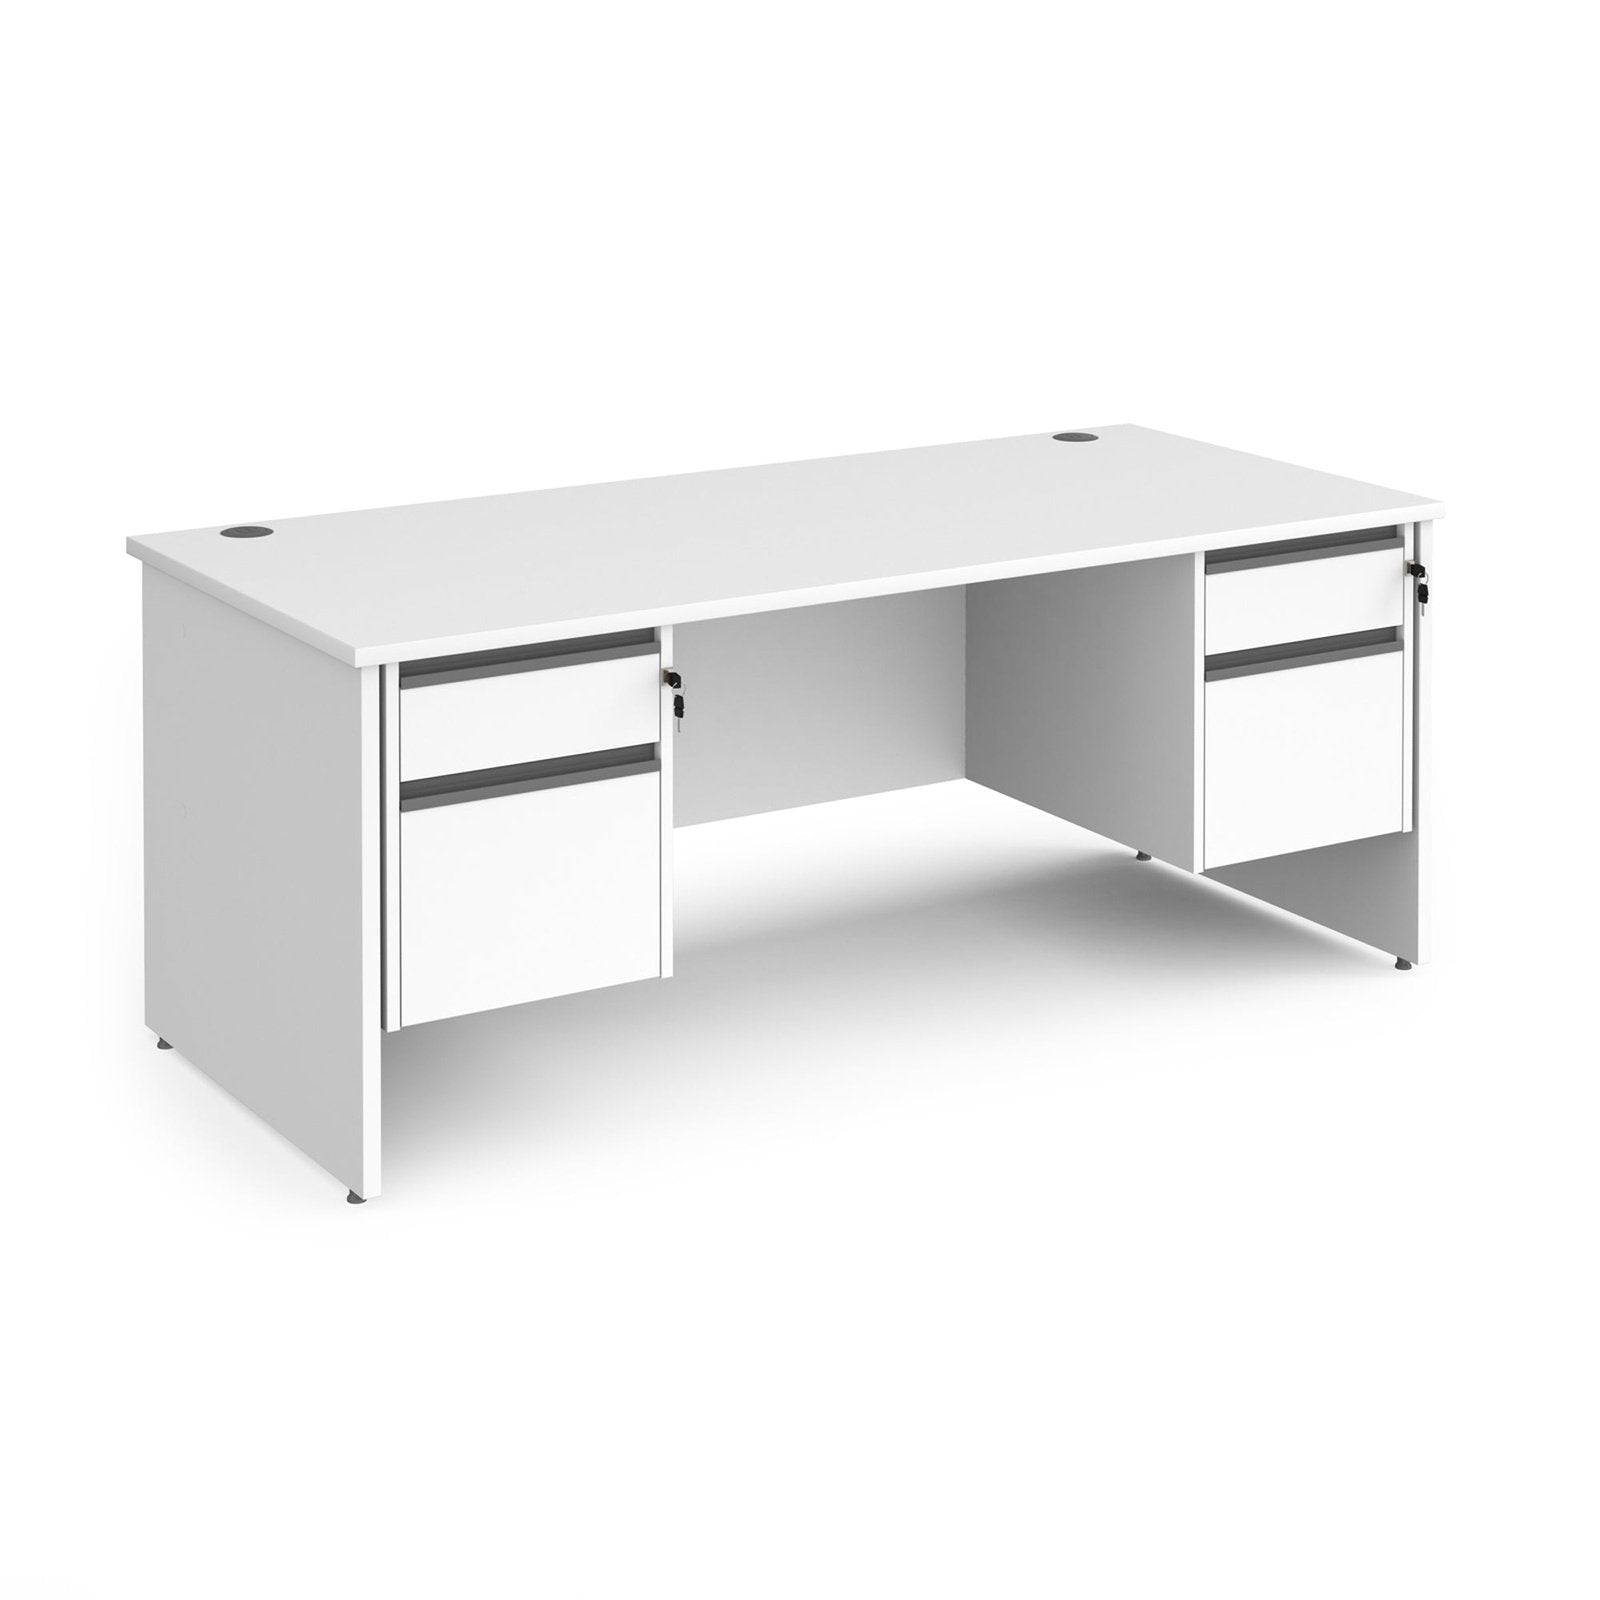 Contract 25 straight desk with 2 drawer pedestals and panel leg - Office Products Online